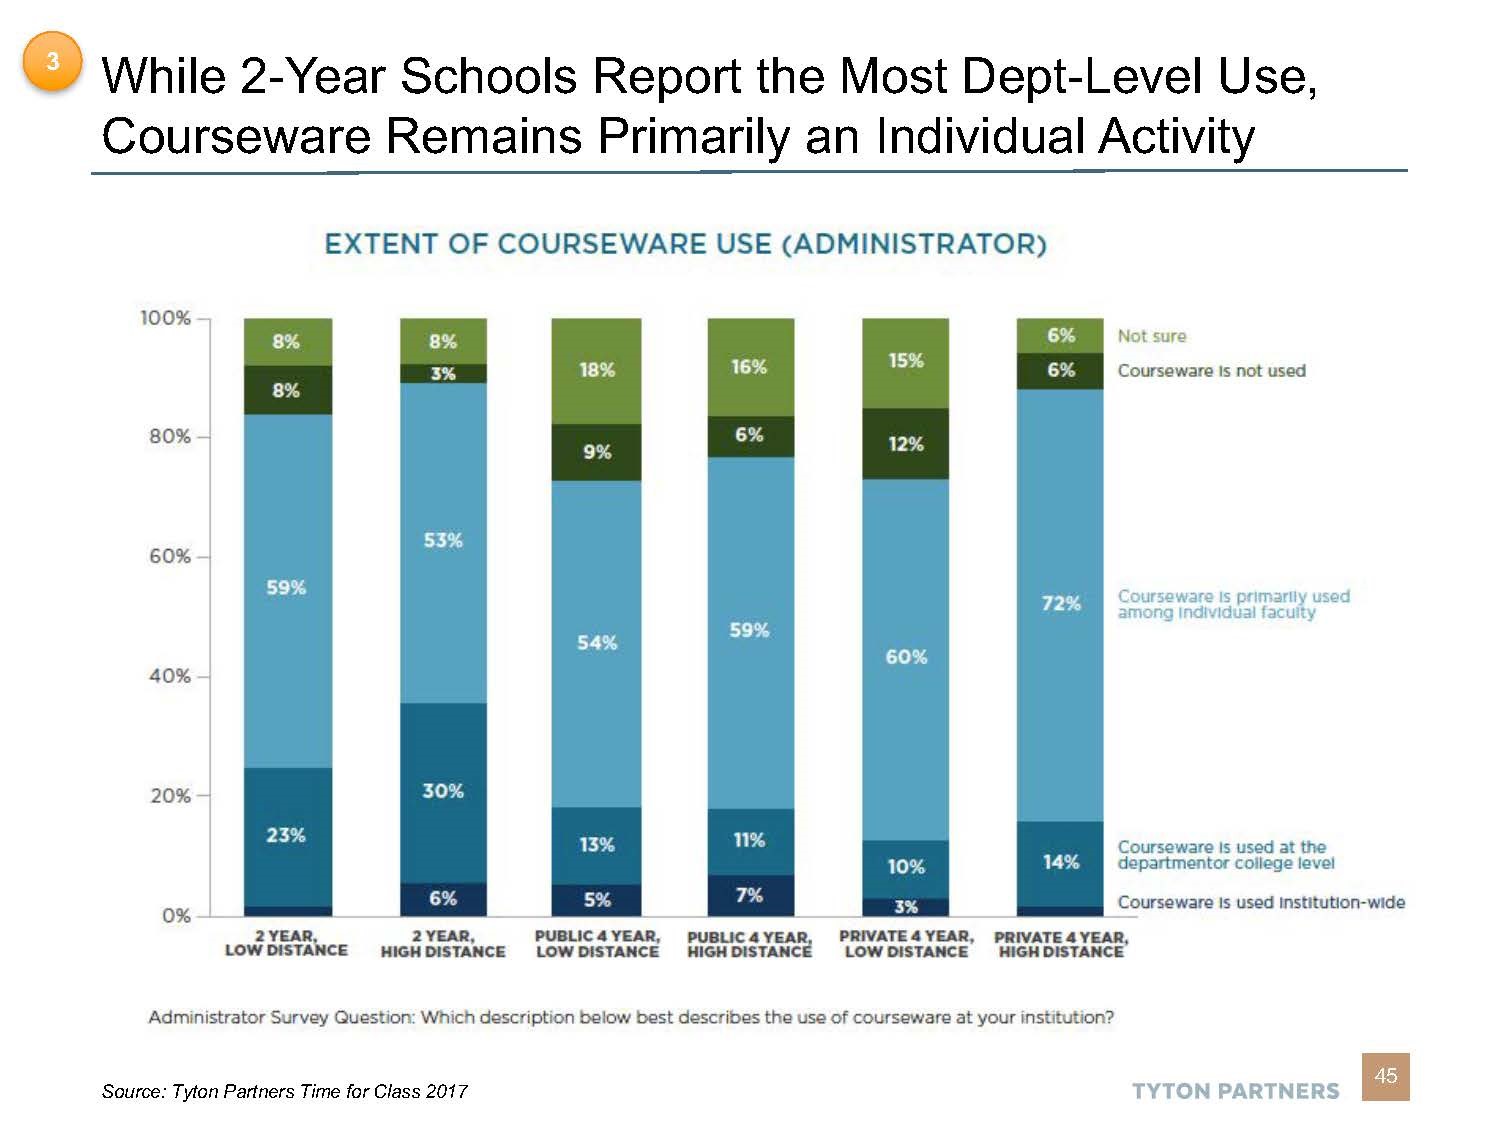 Bar graph of Extent of Courseware Use.